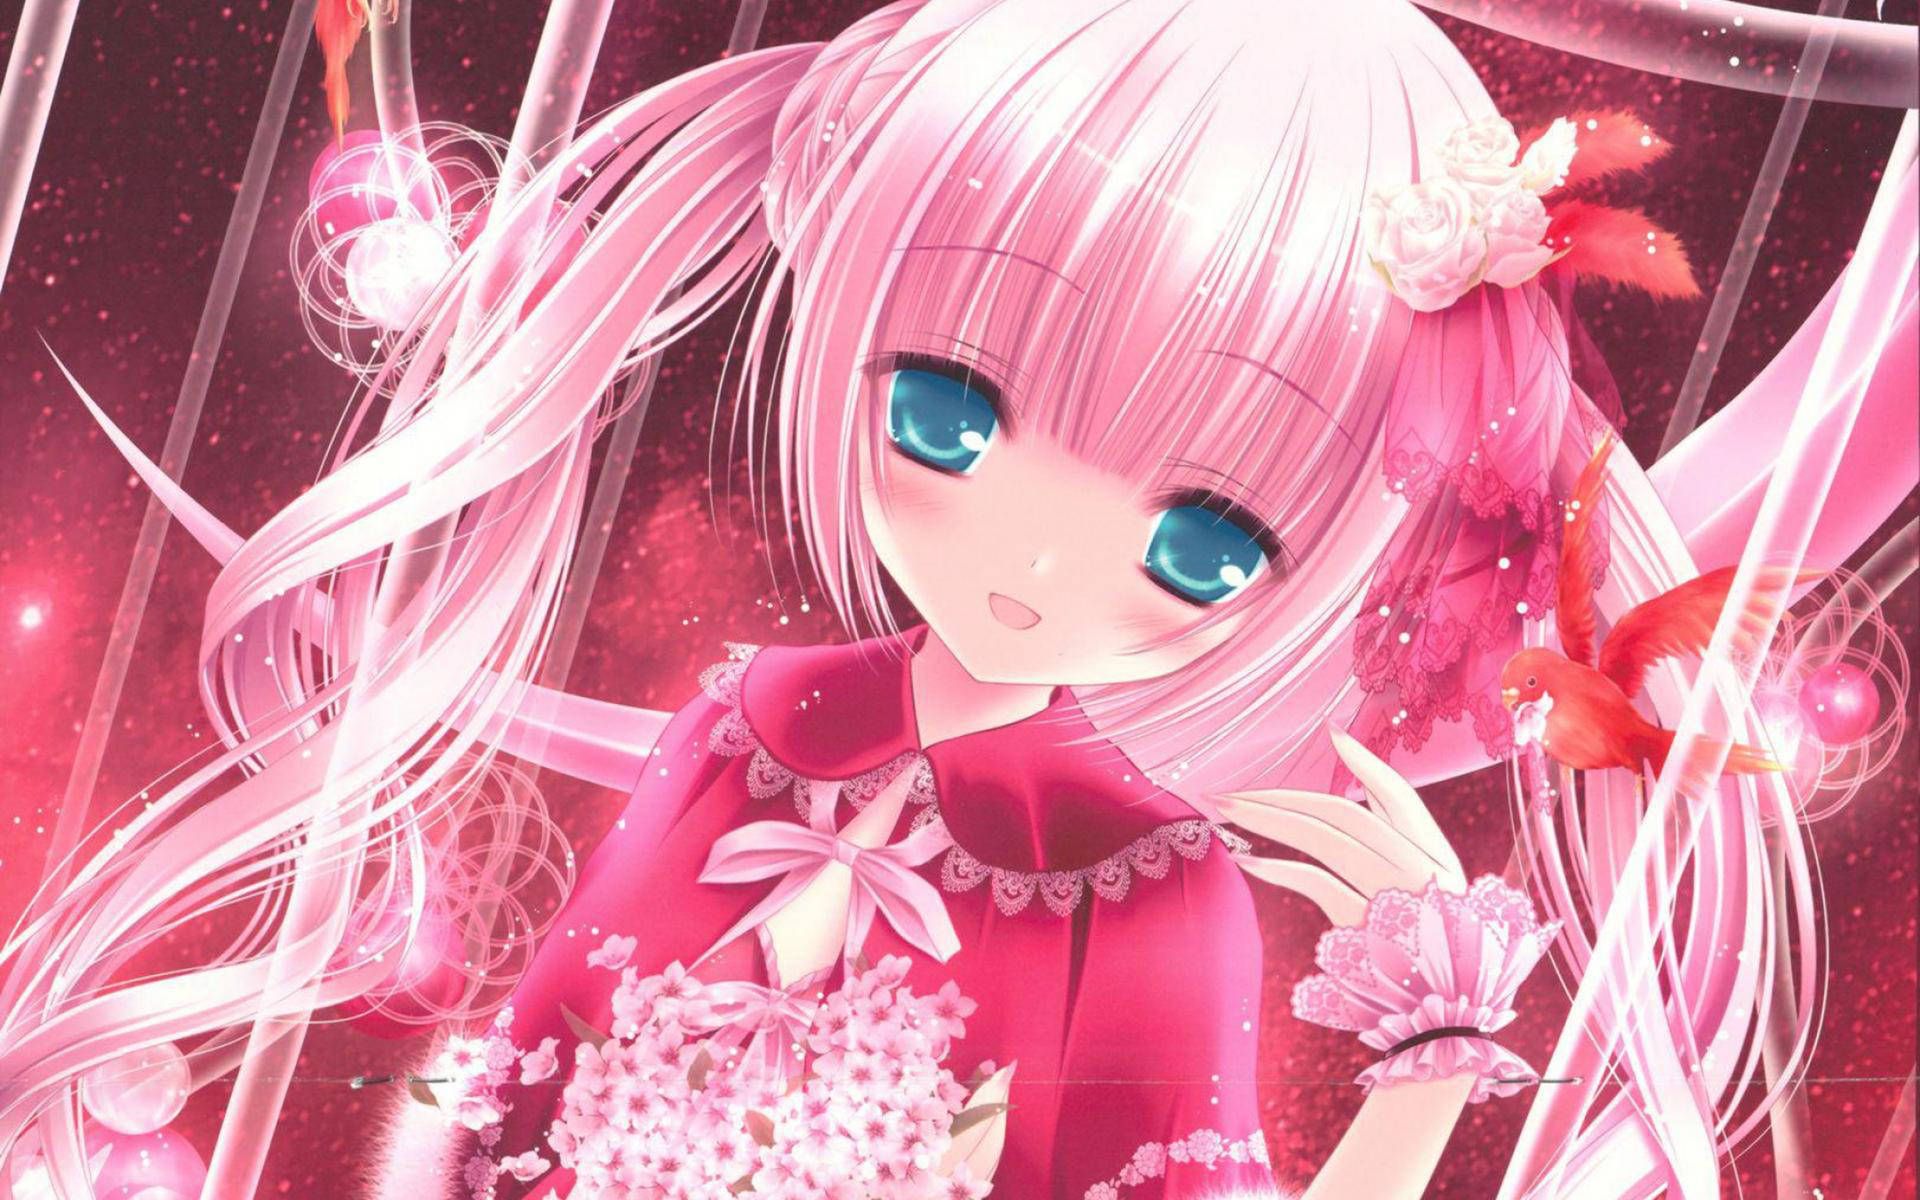 Free Pink Anime Aesthetic Wallpaper Downloads, Pink Anime Aesthetic Wallpaper for FREE